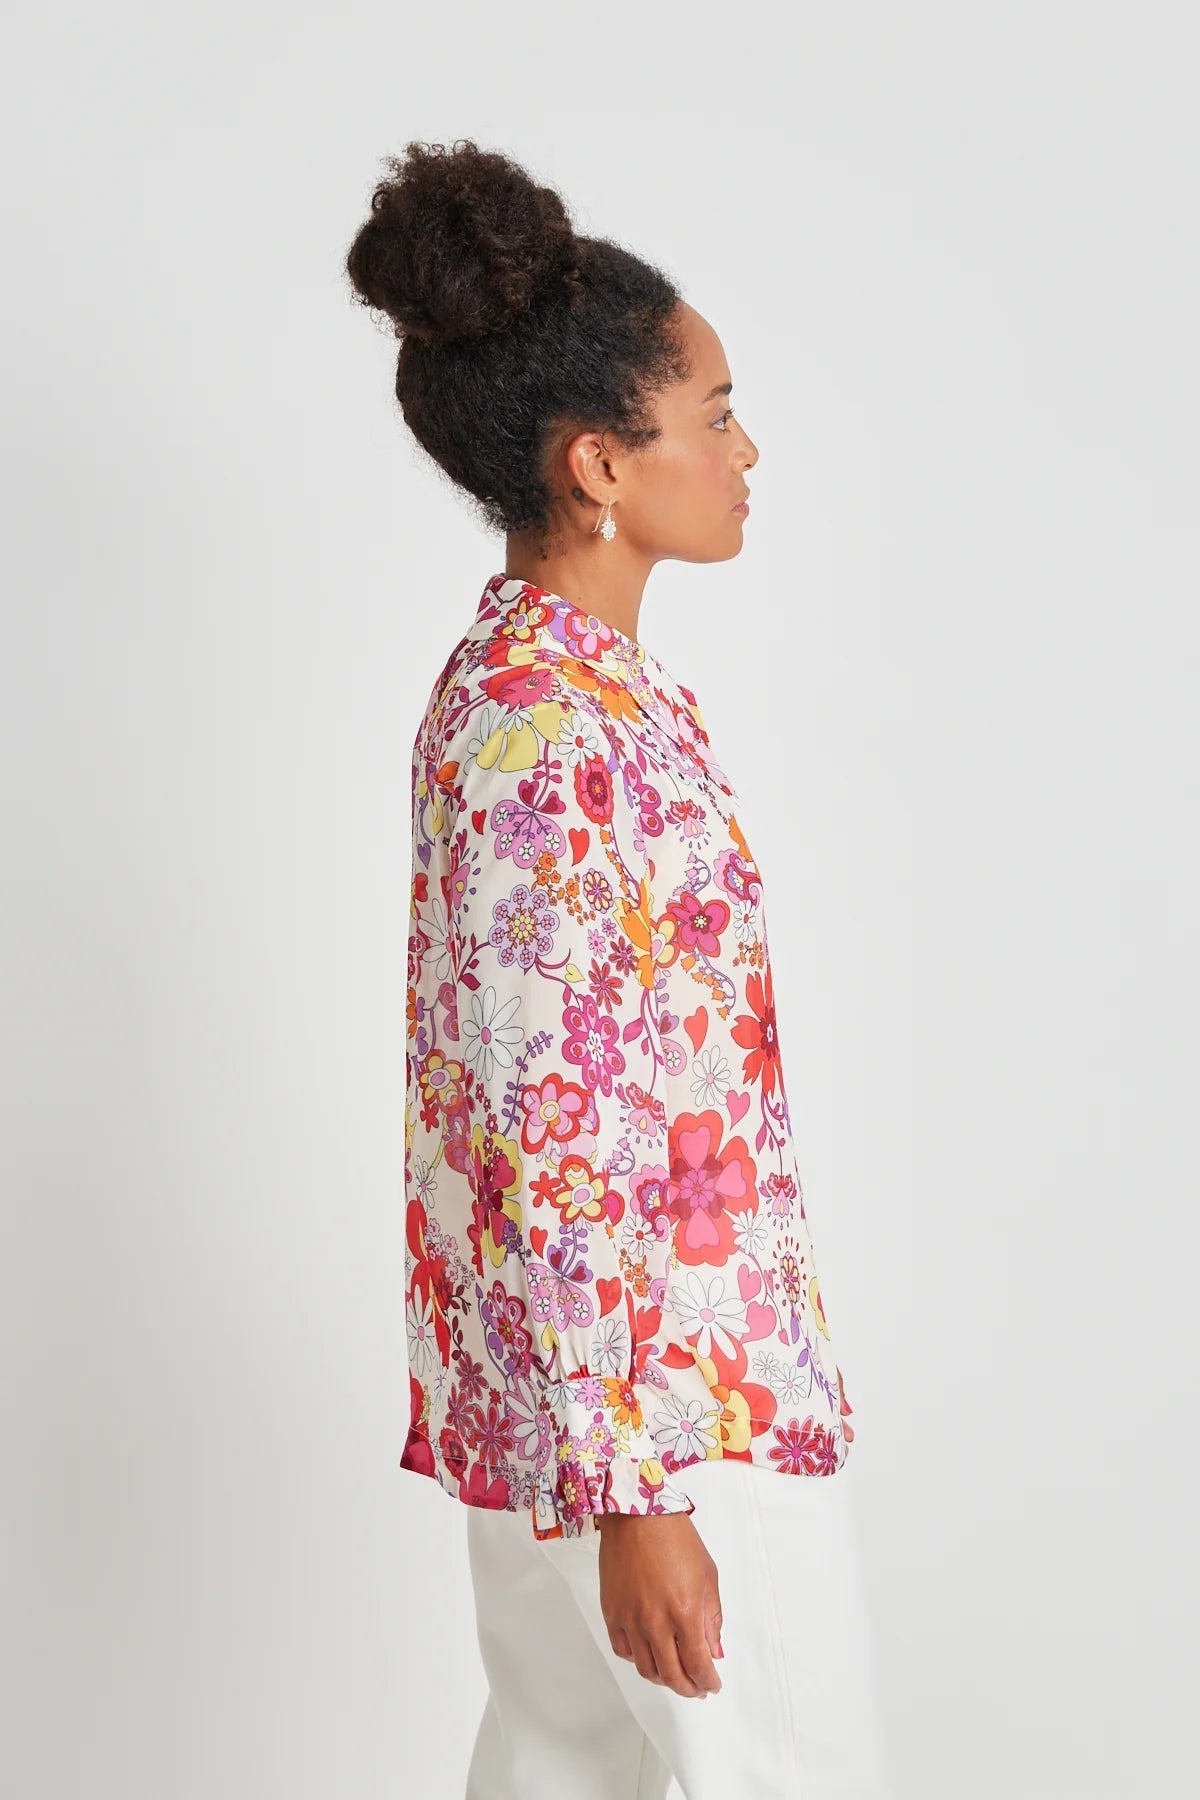 twenty-seven names | Kiss from a Rose shirt | Cream Floral | Palm Boutique